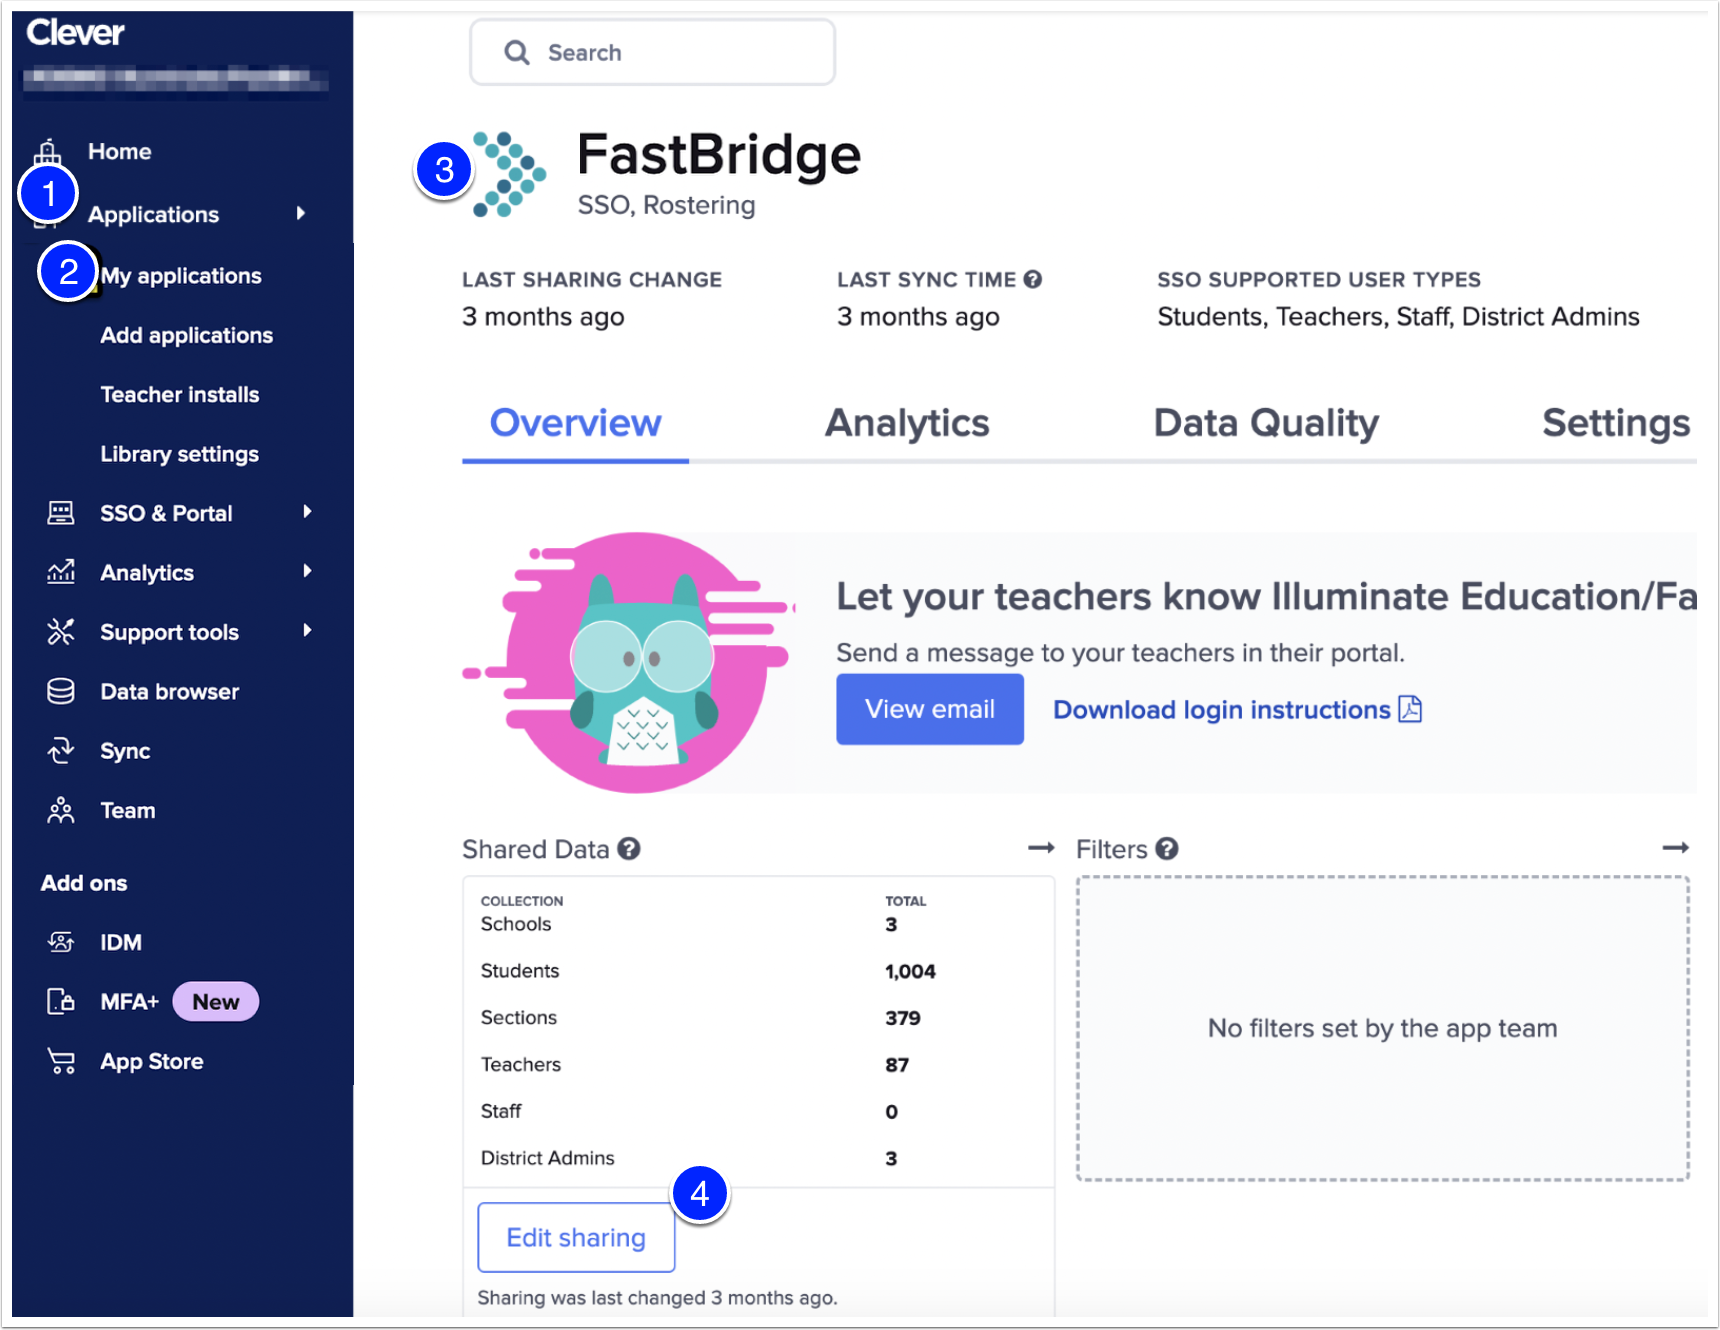 Image of Clever dashboard with application marked as step 1, my applications marked as step 2, fastbridge marked as step 3, and edit sharing marked as step 4